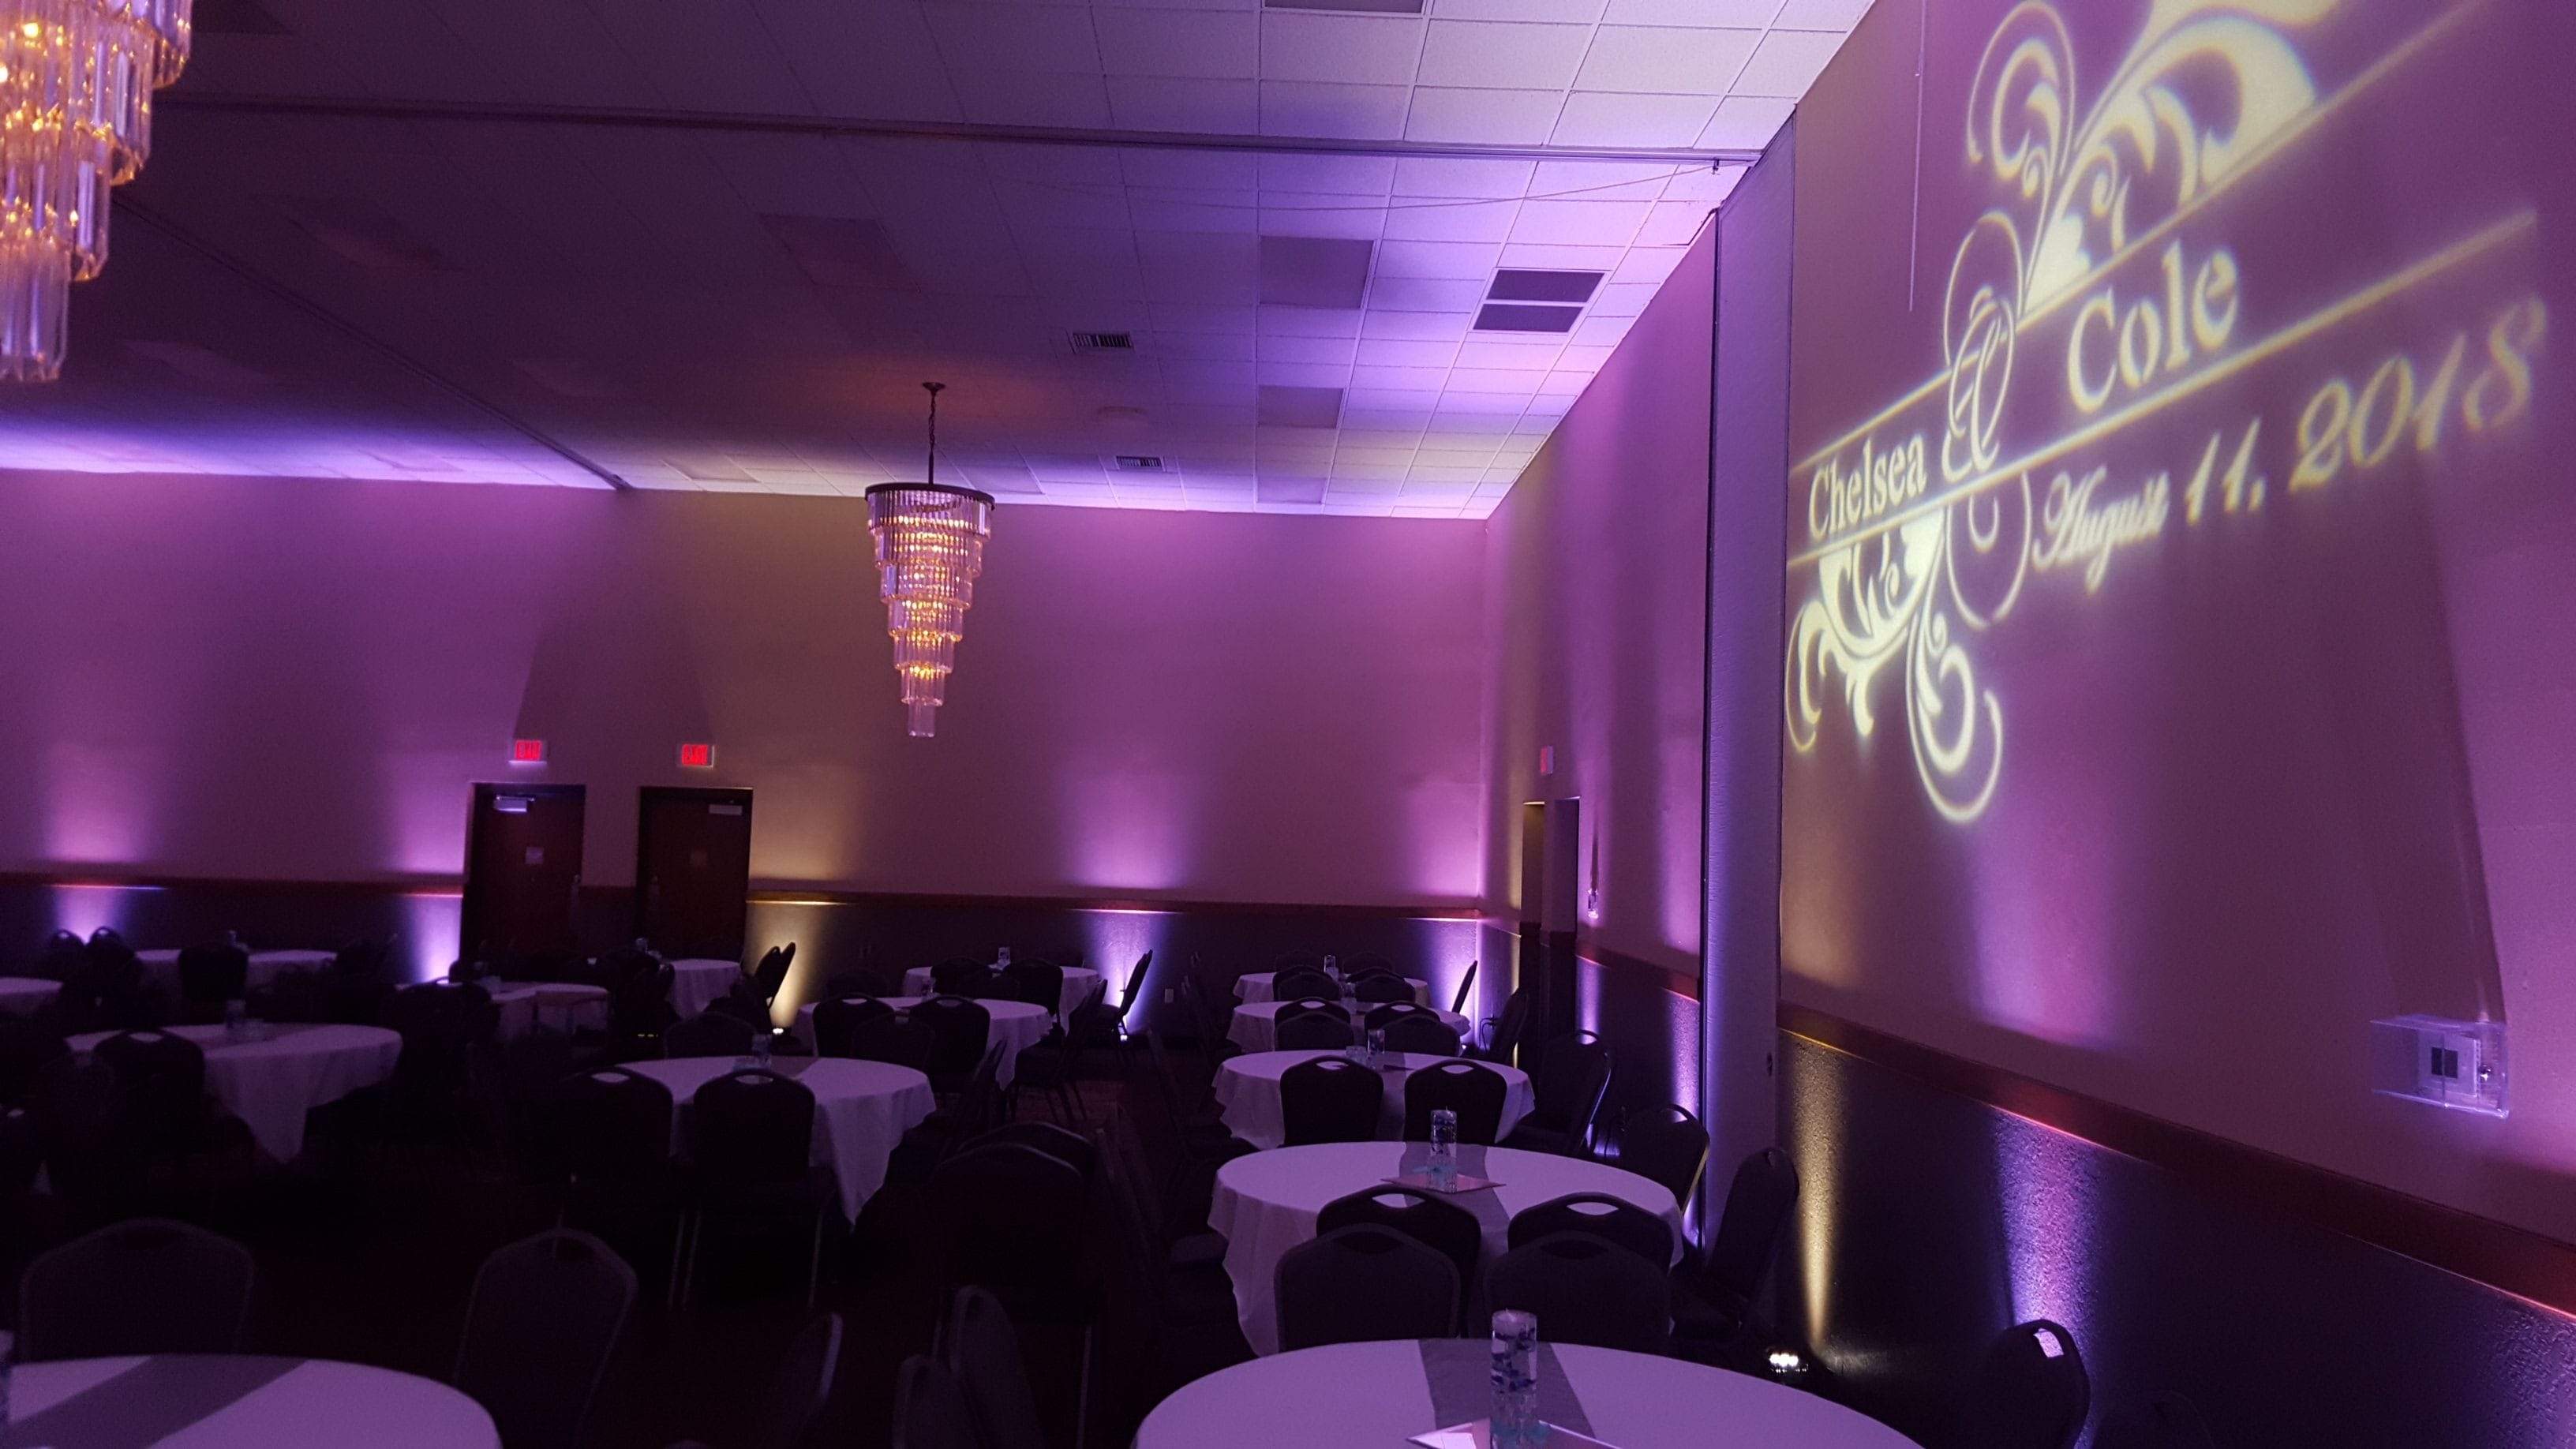 Wedding lighting at Barker's Island. Up lighting in lavender and soft white with a wedding monogram.